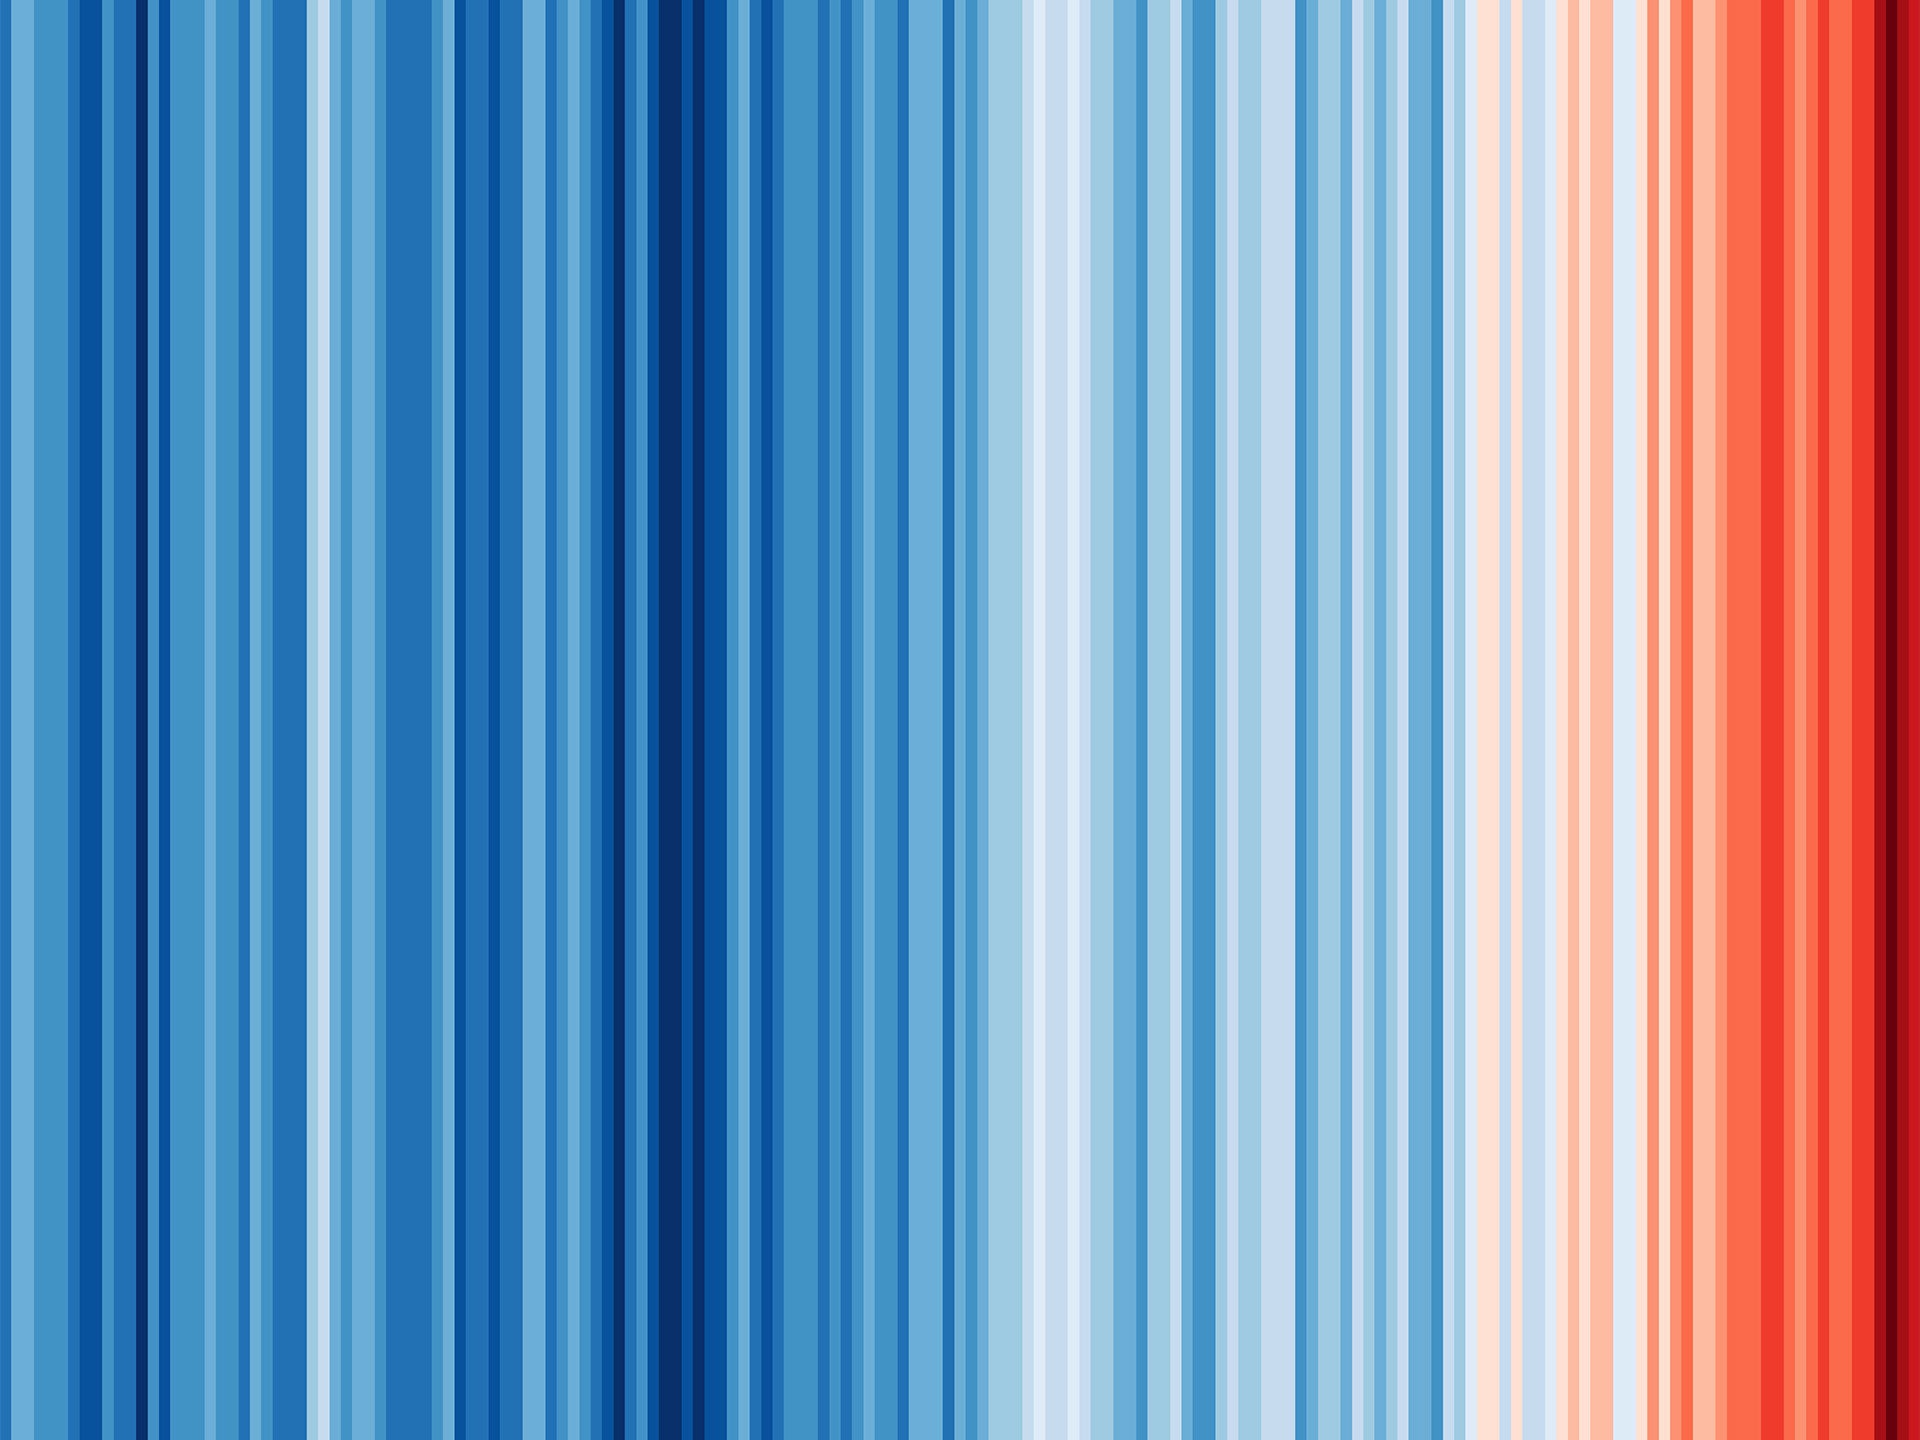 Climate Stripes by Ed Hawkins